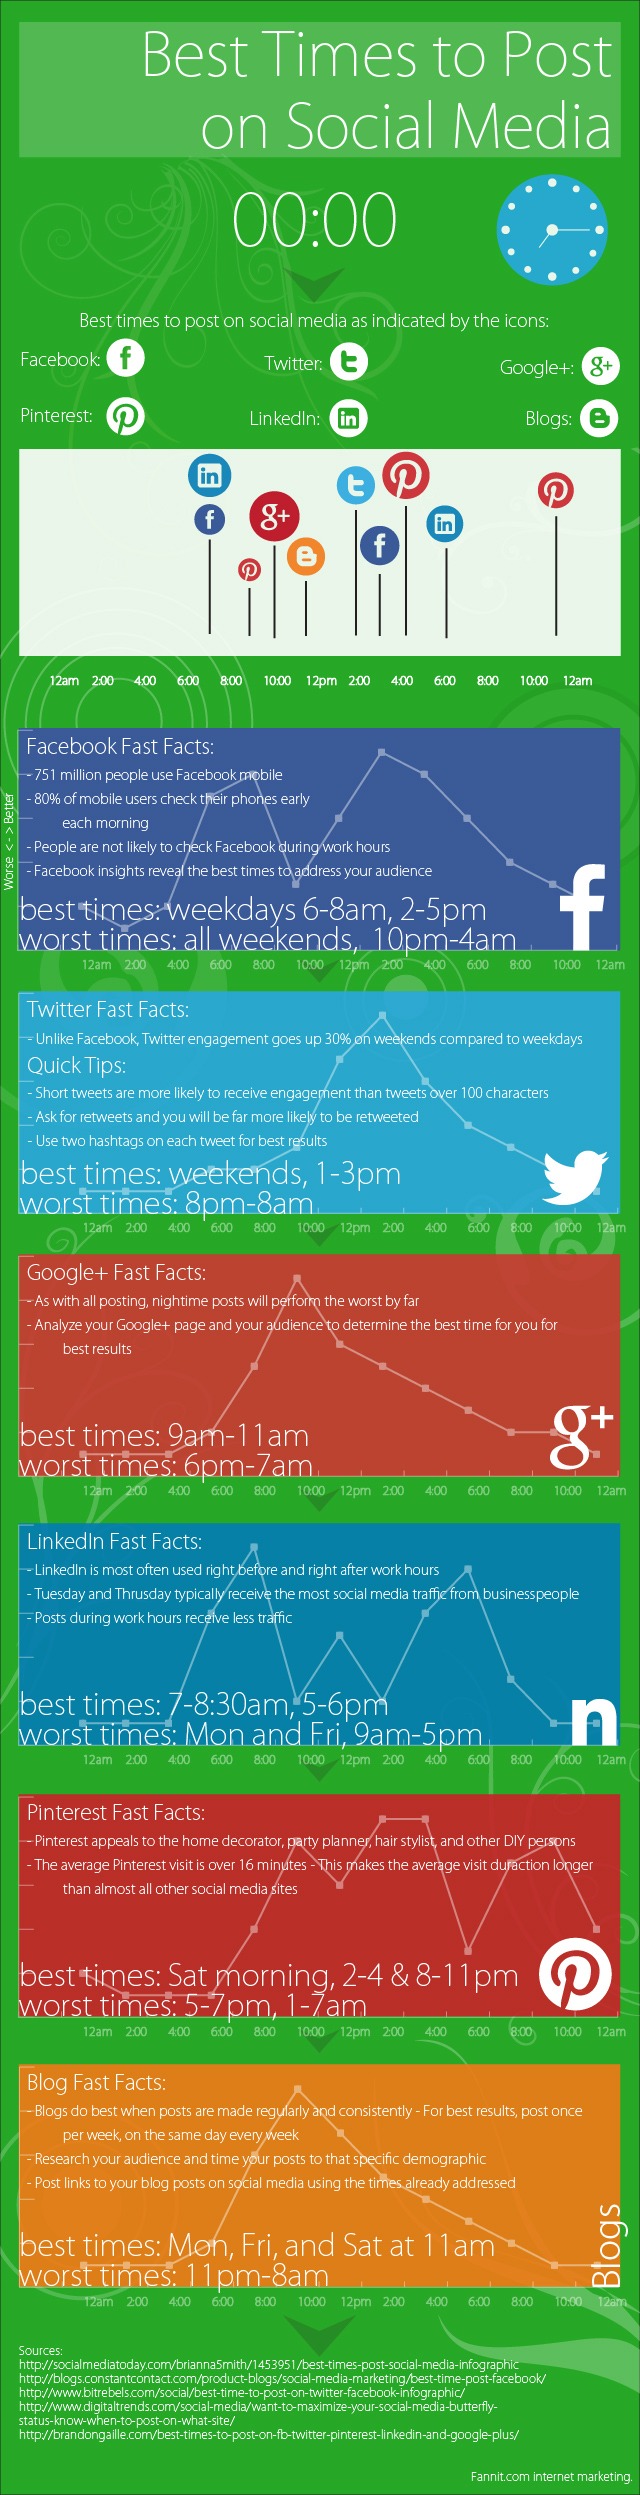 Best Times to Post Social Media